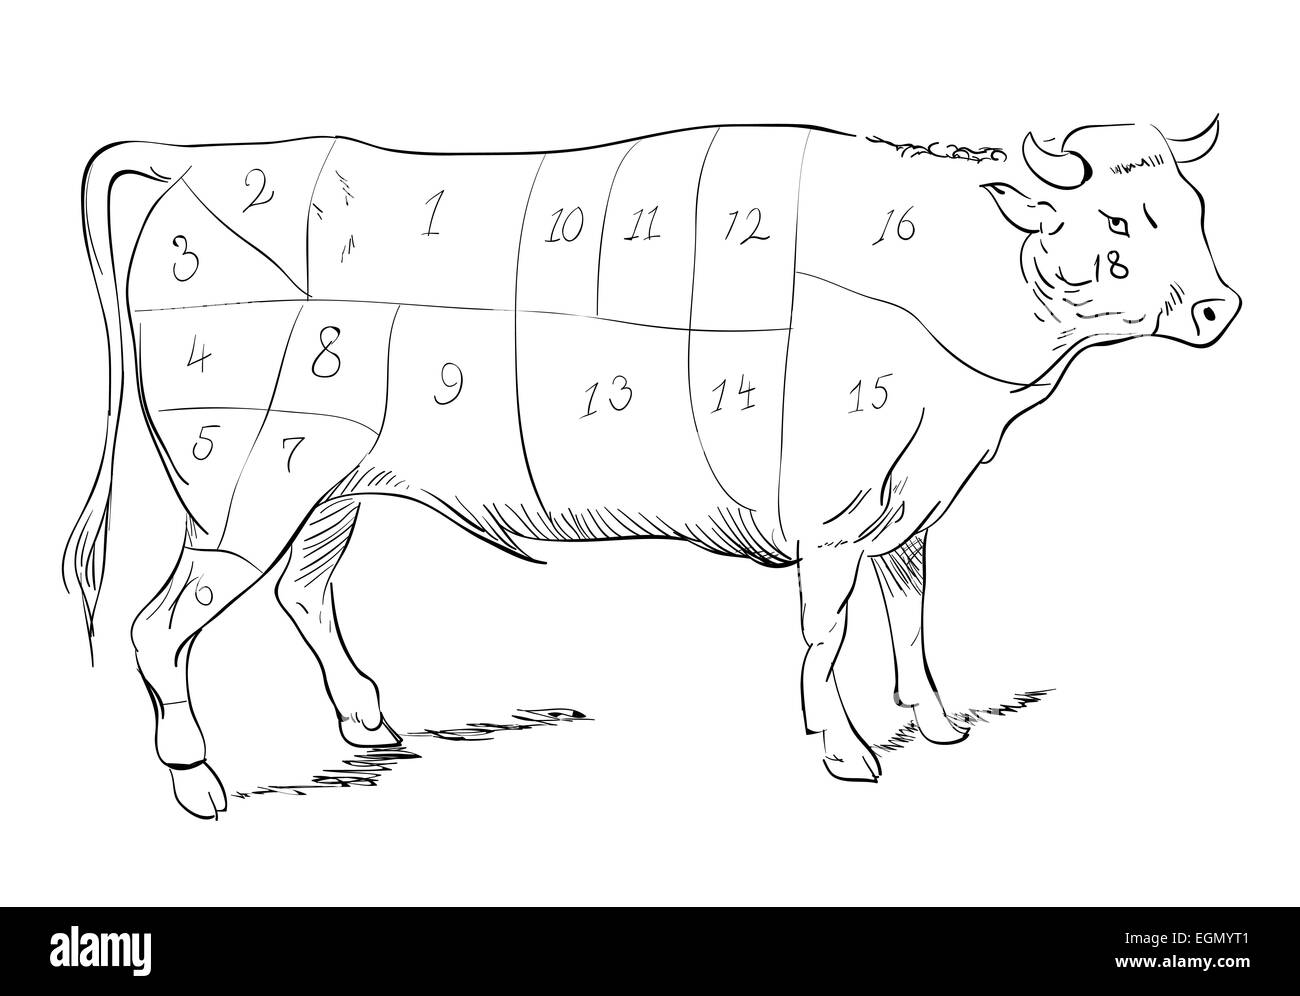 Vector drawing of a beef with cutting parts Stock Photo